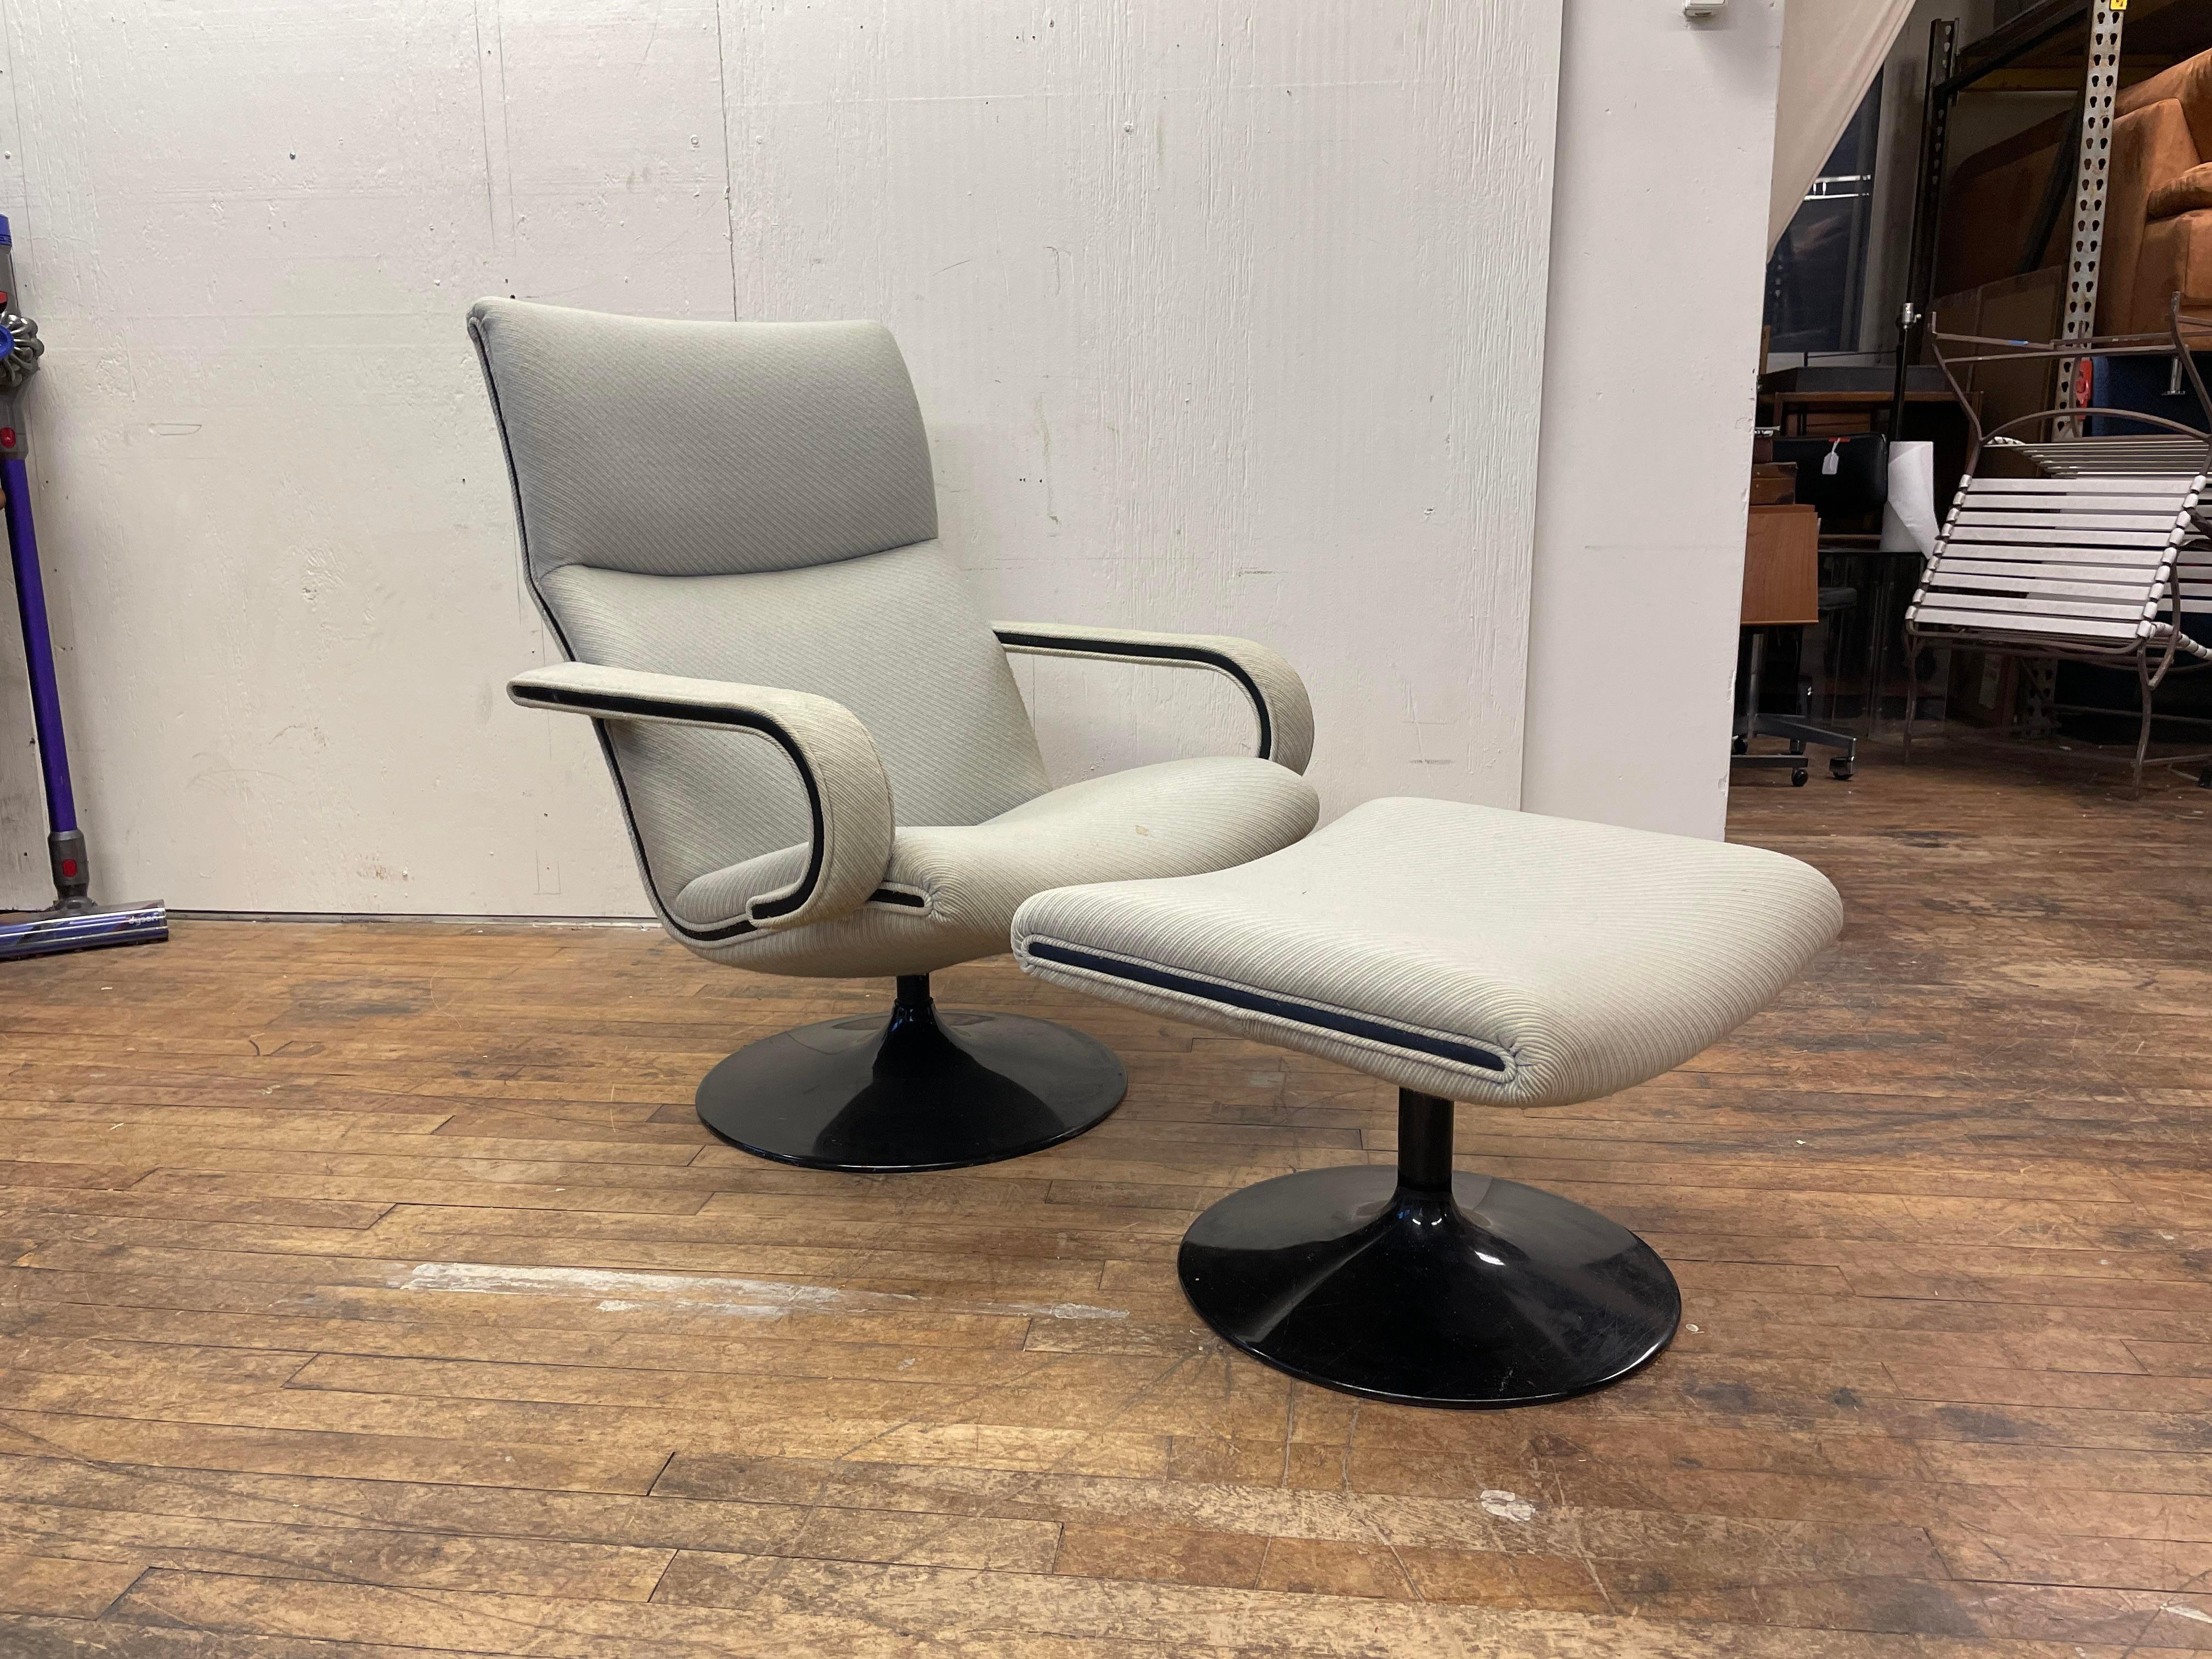 A gorgeous lounge chair and ottoman designed by Geoffrey Harcourt RDI for Artifort. The chair and ottoman are upholstered in a pleasant white, grey, and light blue lined upholstery. The chair is entirely original and is engraved with an Artifort